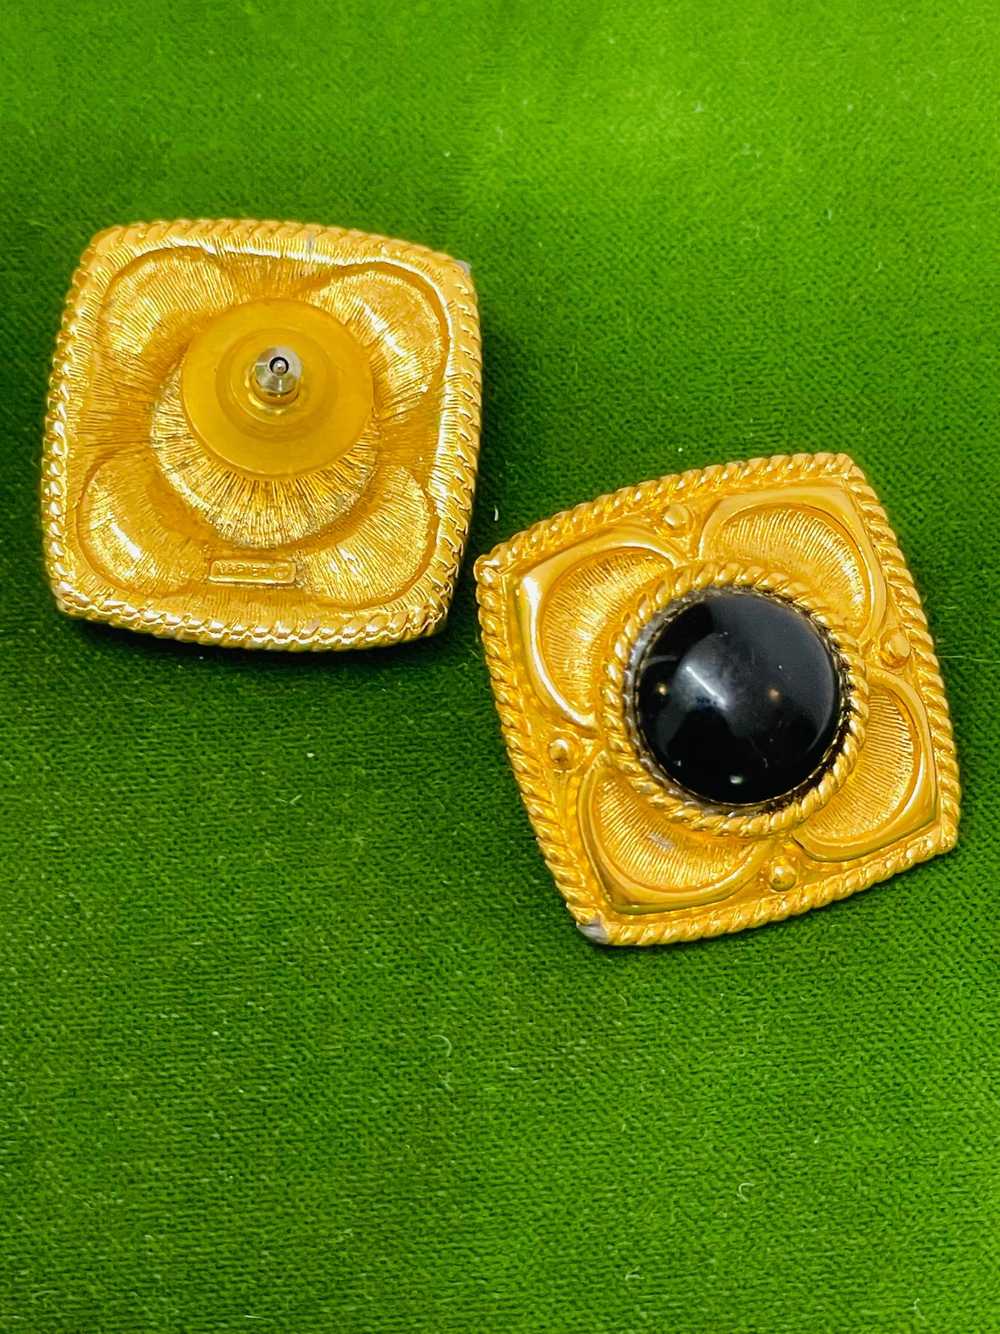 Napier Square Gold Earrings with Black Enamel Dome - image 3